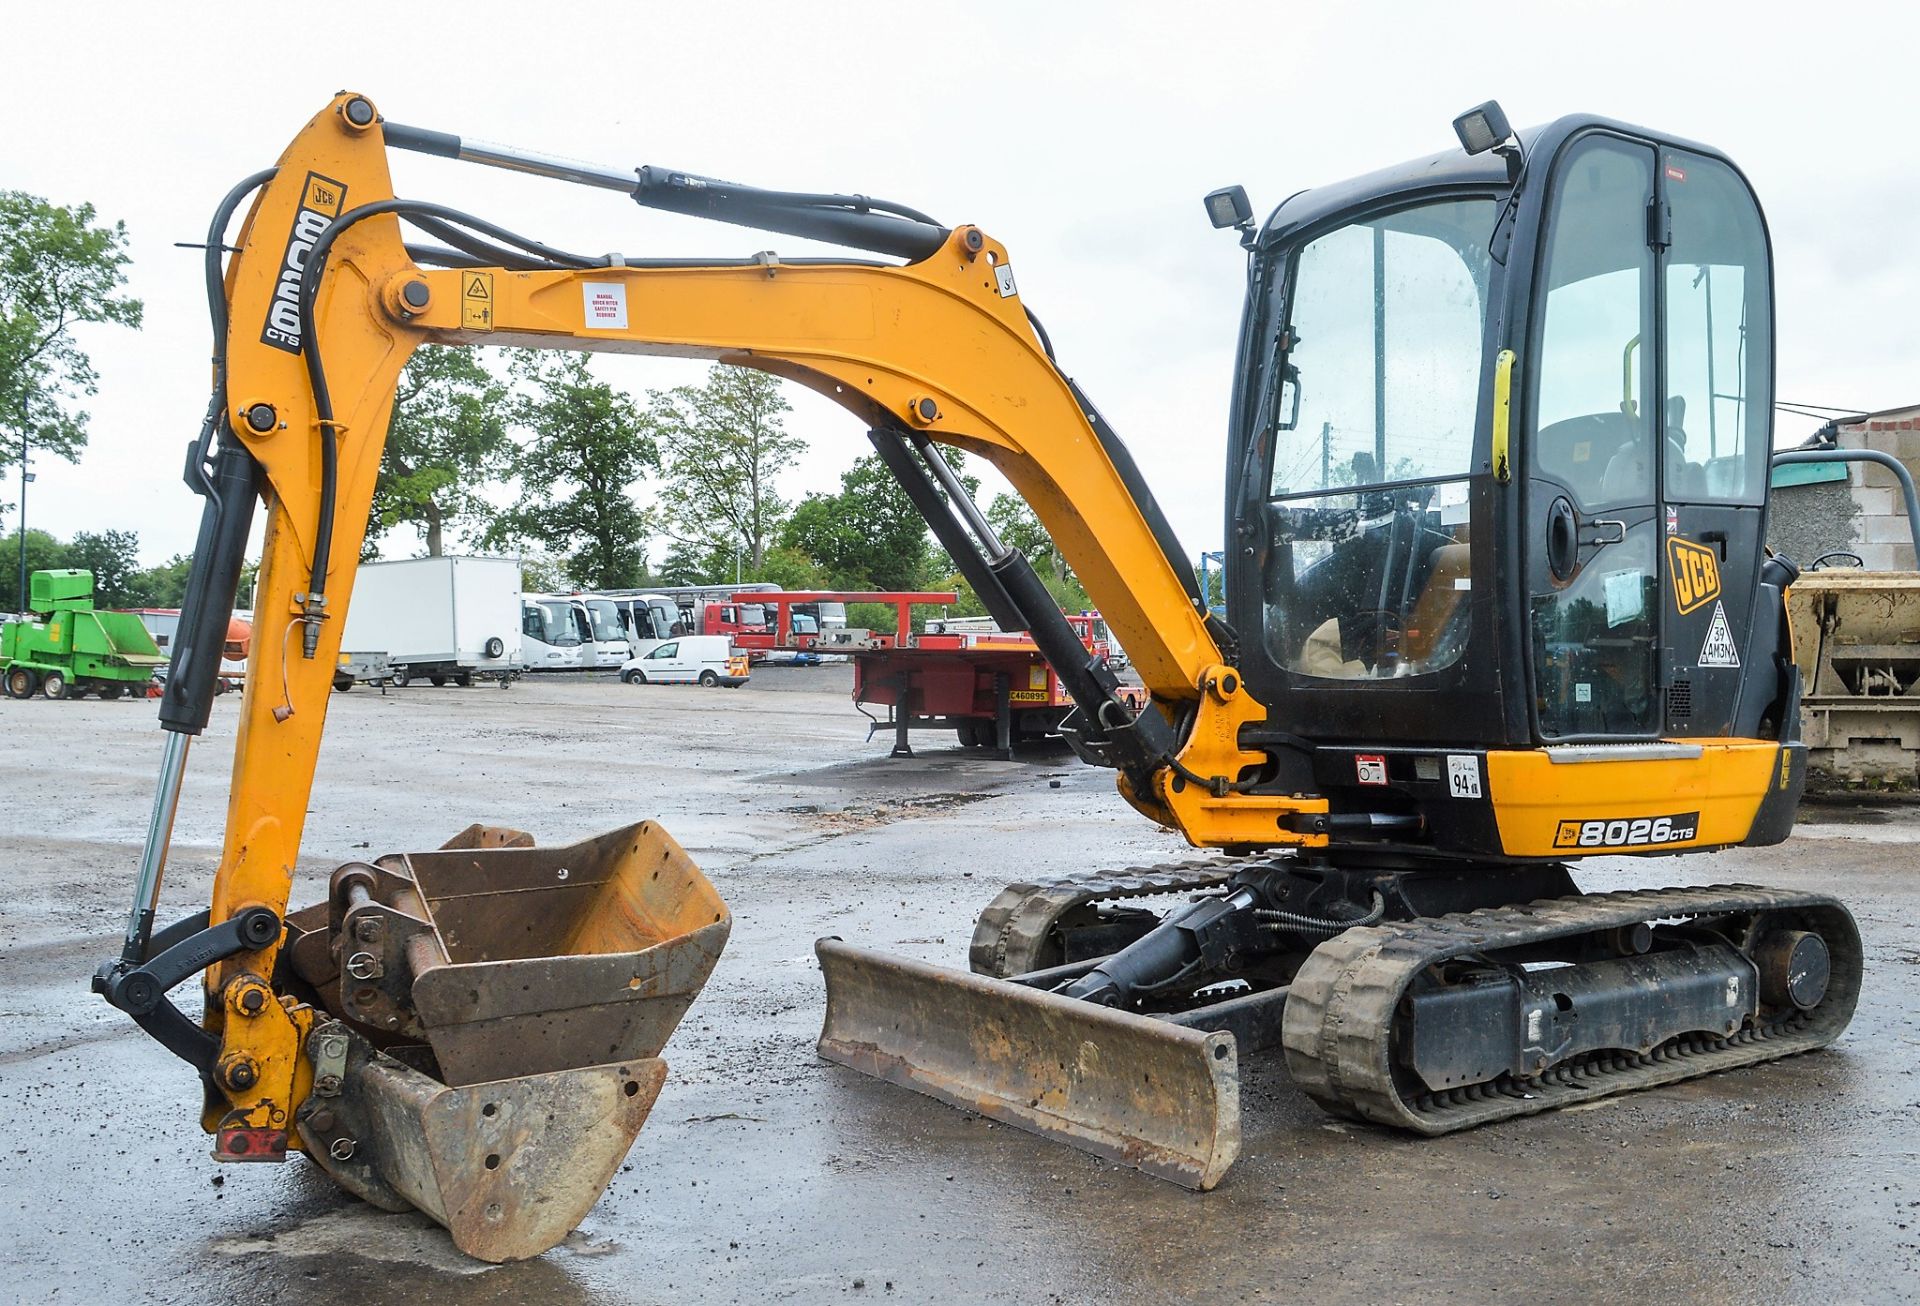 JCB 8026 CTS 2.6 tonne rubber tracked mini excavator Year: 2015 S/N: 1780386 Recorded Hours: 1183